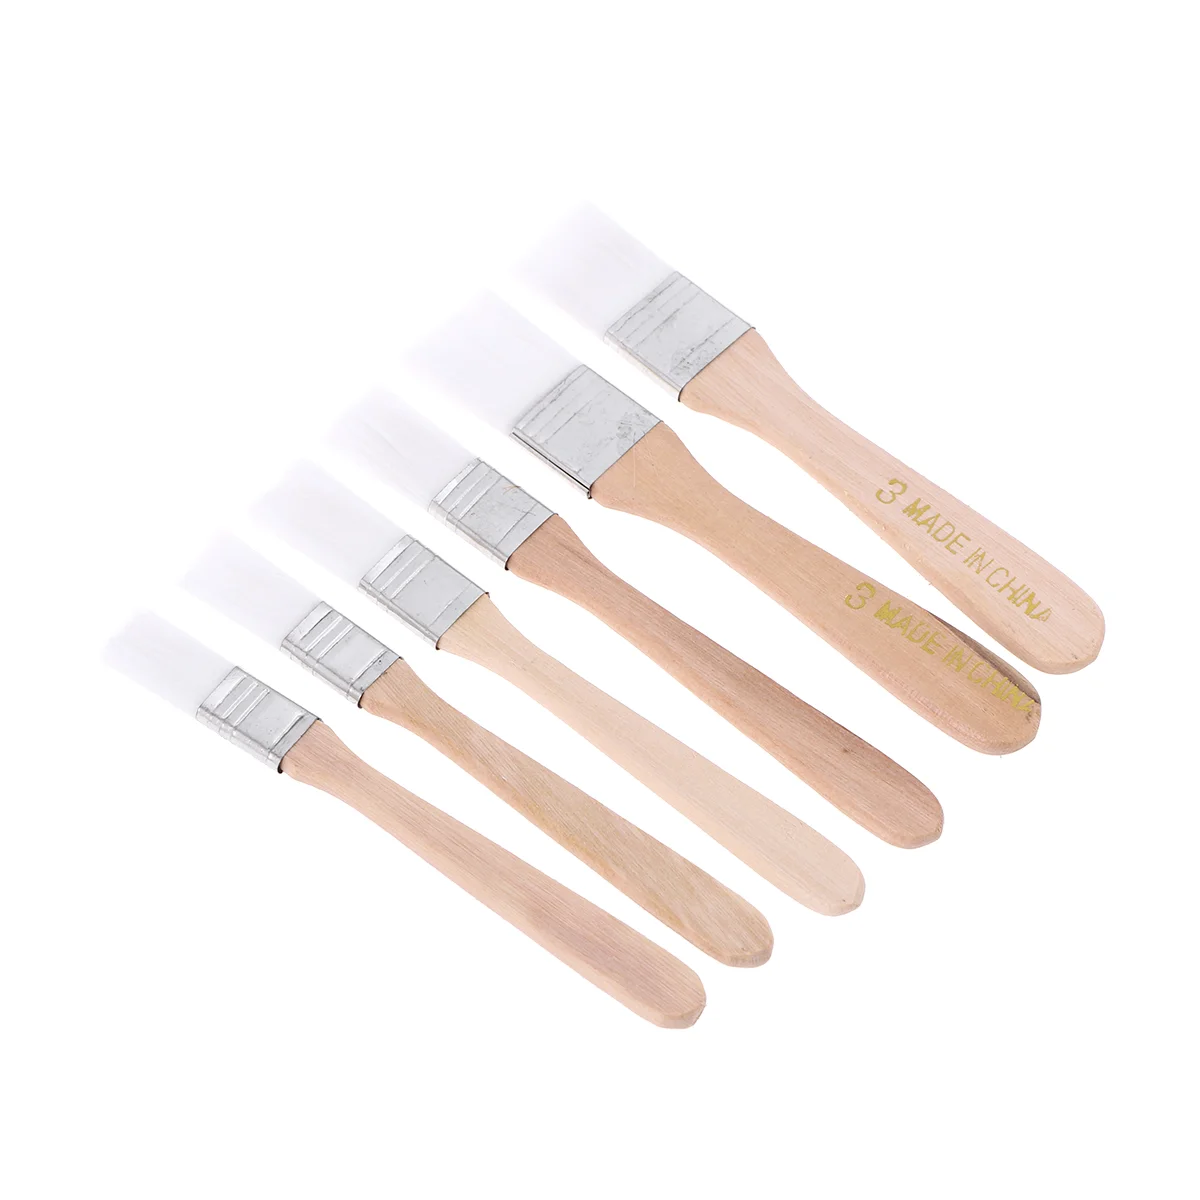 Nylon Thickened Painting Chip Brushes White nylon paint brush Accessory for Adhesives Paint Touchups Painter Supplies 24 25 43pcs sketch pencil set professional sketching drawing kit wood pencil pencil bag for painter school students art supplies